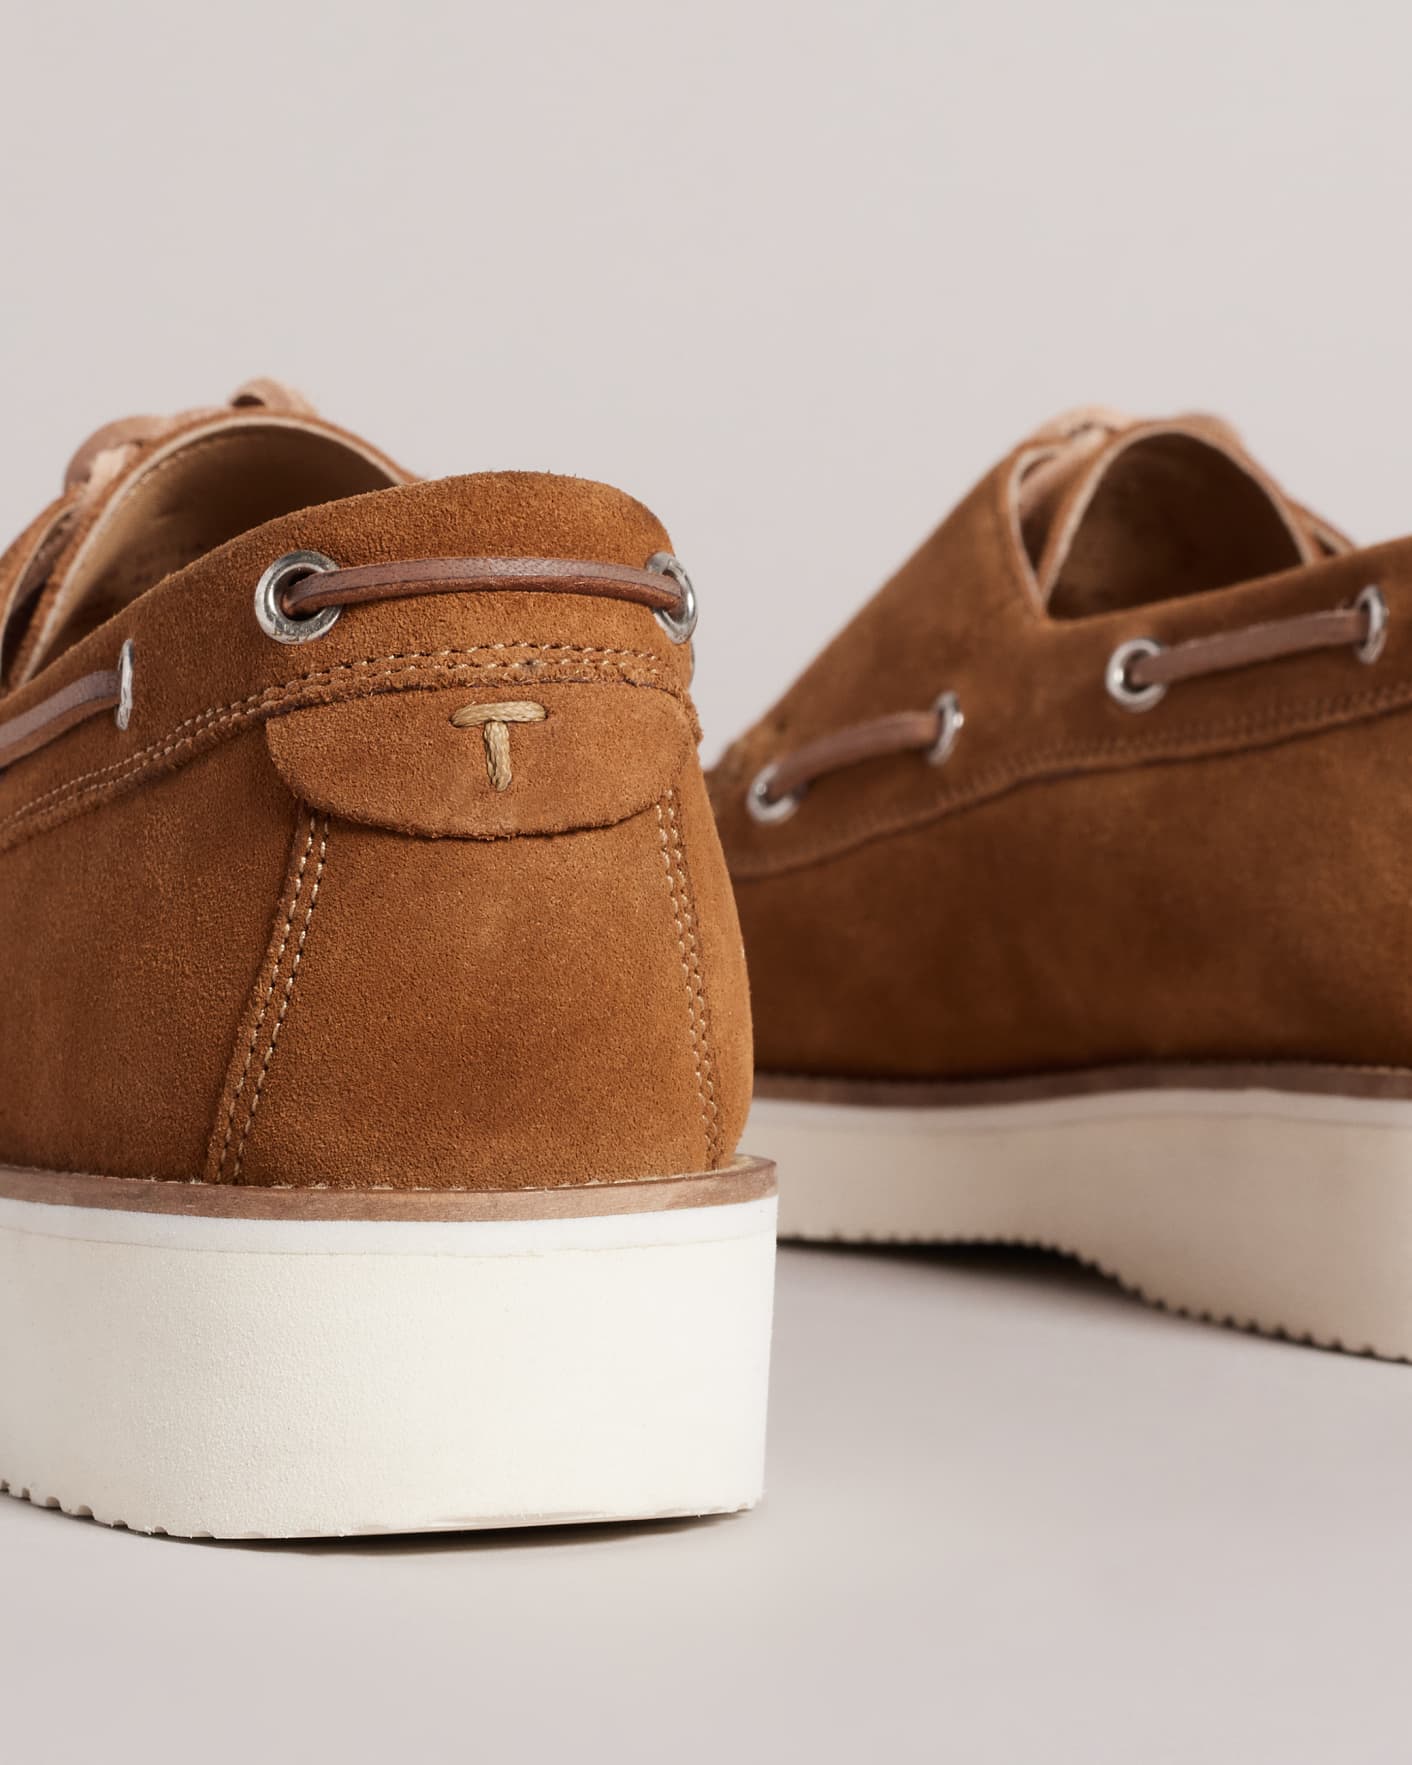 Tan Suede Boat Shoes Ted Baker